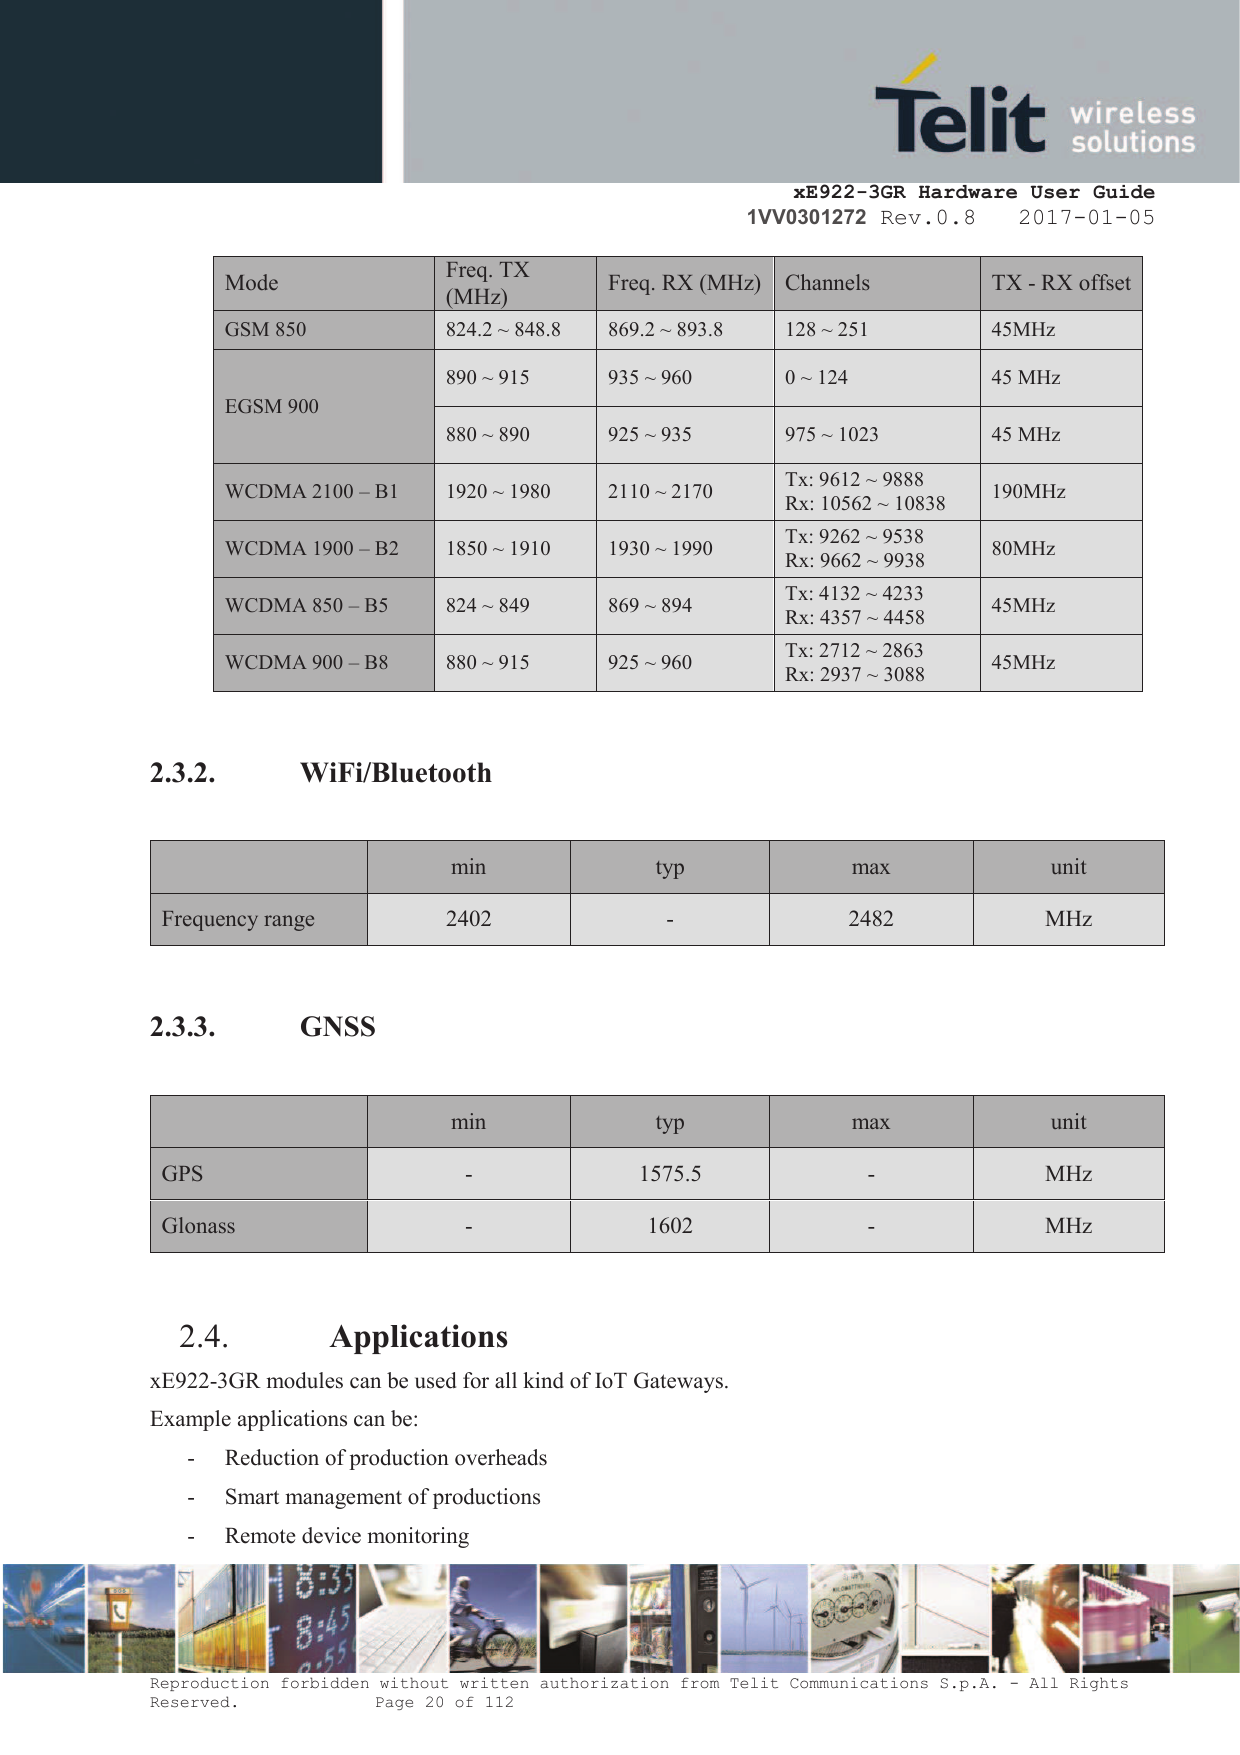     xE922-3GR Hardware User Guide 1VV0301272 Rev.0.8   2017-01-05 Reproduction forbidden without written authorization from Telit Communications S.p.A. - All Rights Reserved.    Page 20 of 112  Mode Freq. TX (MHz) Freq. RX (MHz) Channels TX - RX offset GSM 850 824.2 ~ 848.8 869.2 ~ 893.8 128 ~ 251 45MHz EGSM 900 890 ~ 915 935 ~ 960 0 ~ 124 45 MHz 880 ~ 890 925 ~ 935 975 ~ 1023 45 MHz WCDMA 2100 – B1 1920 ~ 1980 2110 ~ 2170 Tx: 9612 ~ 9888 Rx: 10562 ~ 10838 190MHz WCDMA 1900 – B2 1850 ~ 1910 1930 ~ 1990 Tx: 9262 ~ 9538 Rx: 9662 ~ 9938 80MHz WCDMA 850 – B5 824 ~ 849 869 ~ 894 Tx: 4132 ~ 4233 Rx: 4357 ~ 4458 45MHz WCDMA 900 – B8 880 ~ 915 925 ~ 960 Tx: 2712 ~ 2863 Rx: 2937 ~ 3088 45MHz  2.3.2. WiFi/Bluetooth   min  typ  max  unit Frequency range 2402 - 2482 MHz  2.3.3. GNSS   min typ max unit GPS - 1575.5 - MHz Glonass  -  1602  -  MHz  2.4. Applications xE922-3GR modules can be used for all kind of IoT Gateways.  Example applications can be: - Reduction of production overheads - Smart management of productions - Remote device monitoring 